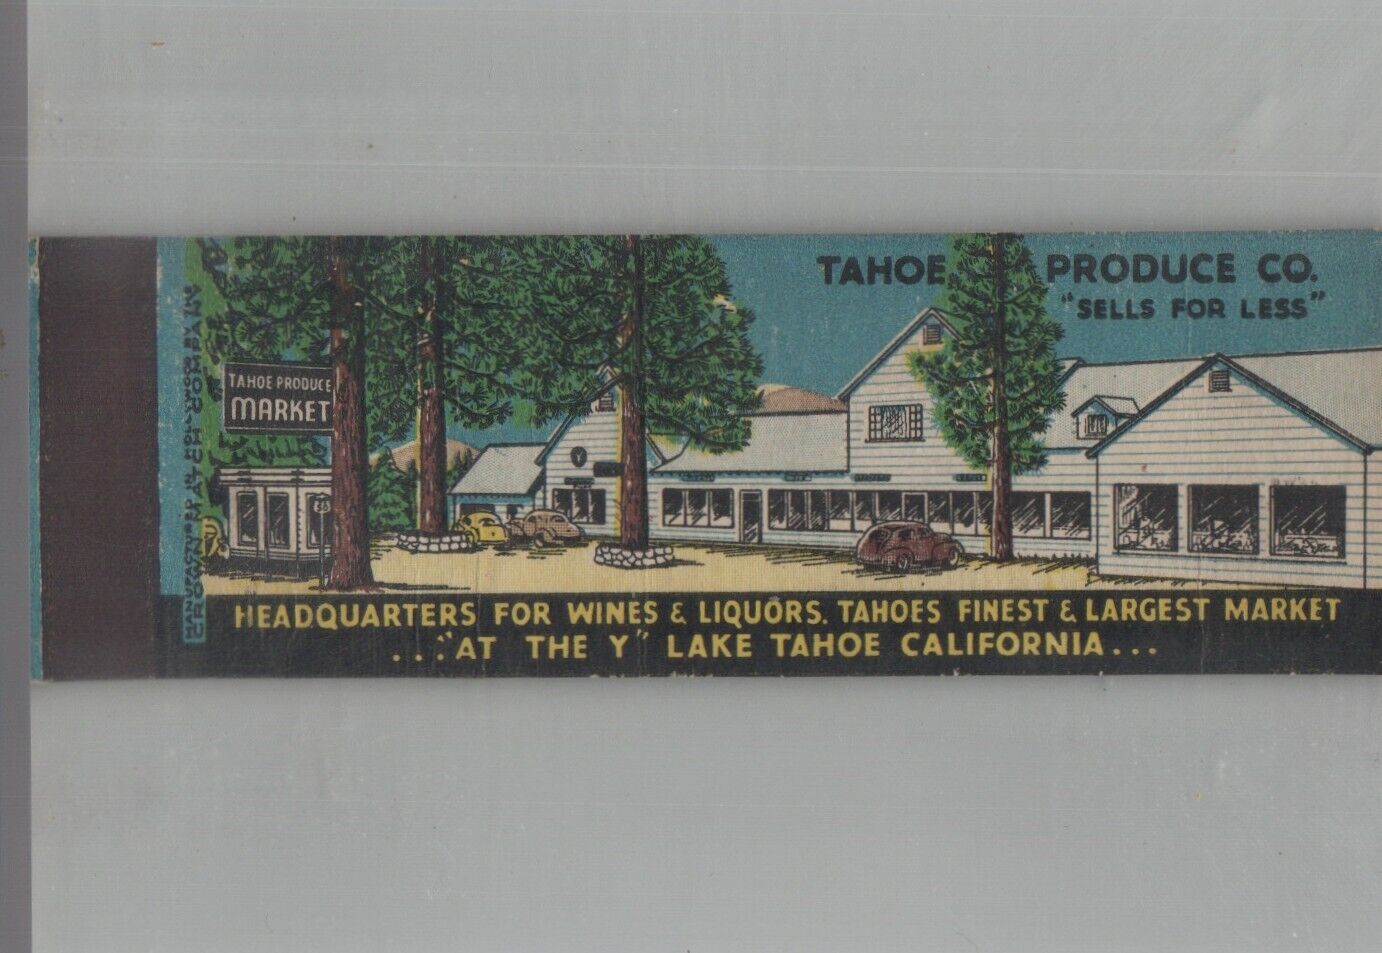 Matchbook Cover Full Length Tahoe Produce Co. Sells For Less Lake Tahoe, CA